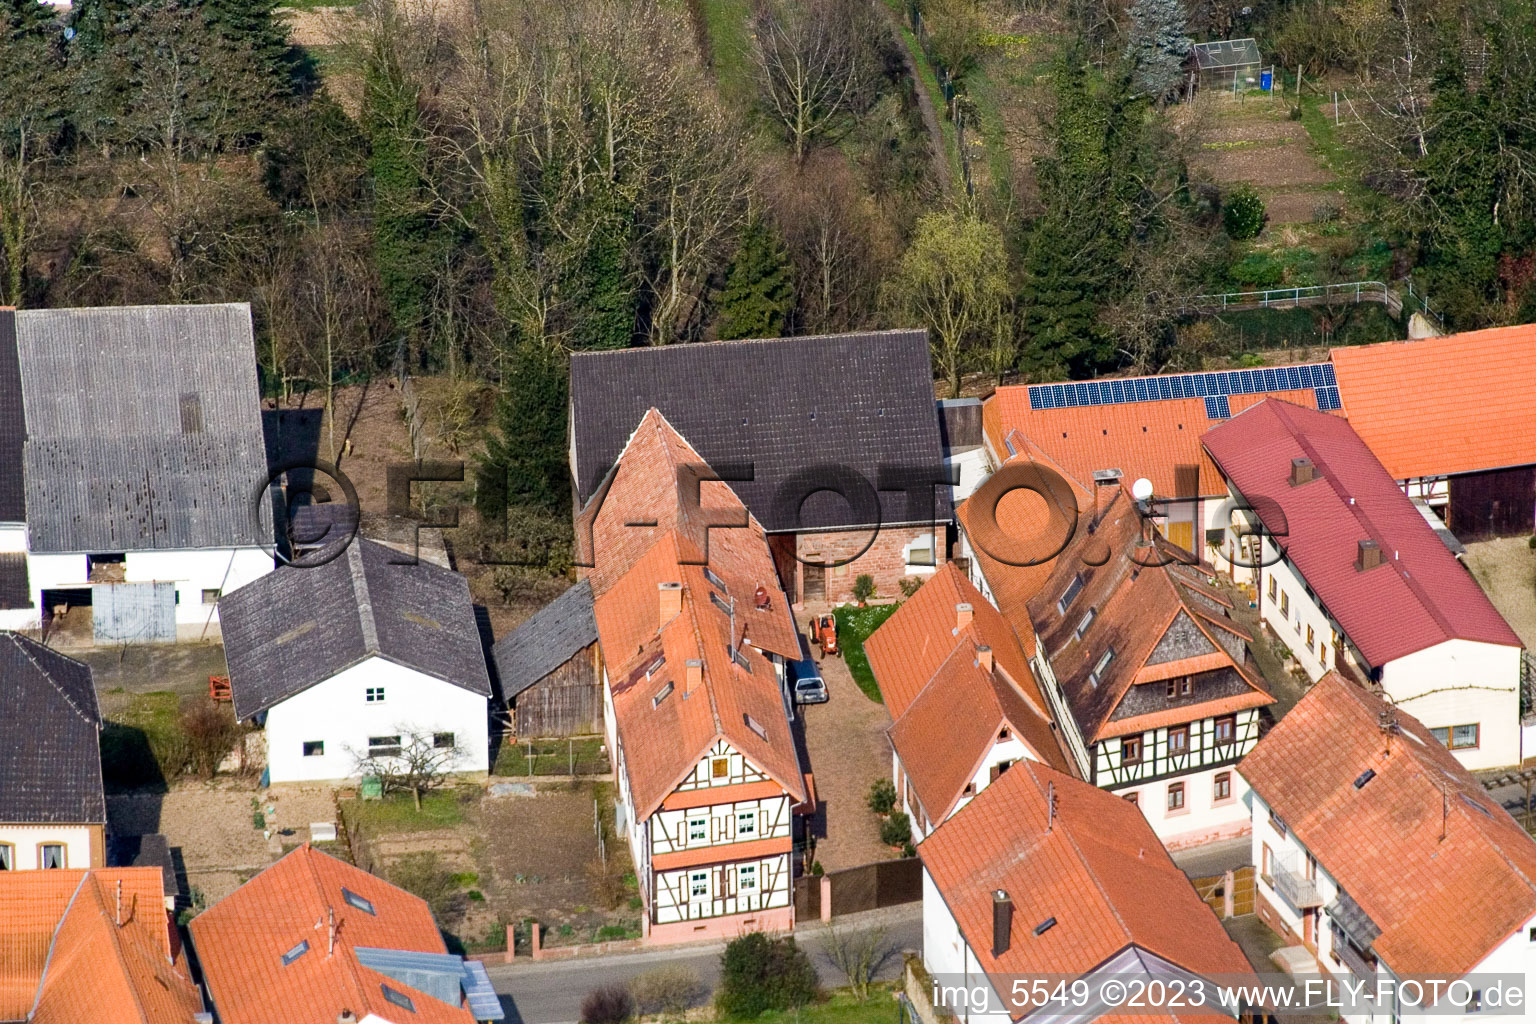 Drone recording of Hergersweiler in the state Rhineland-Palatinate, Germany